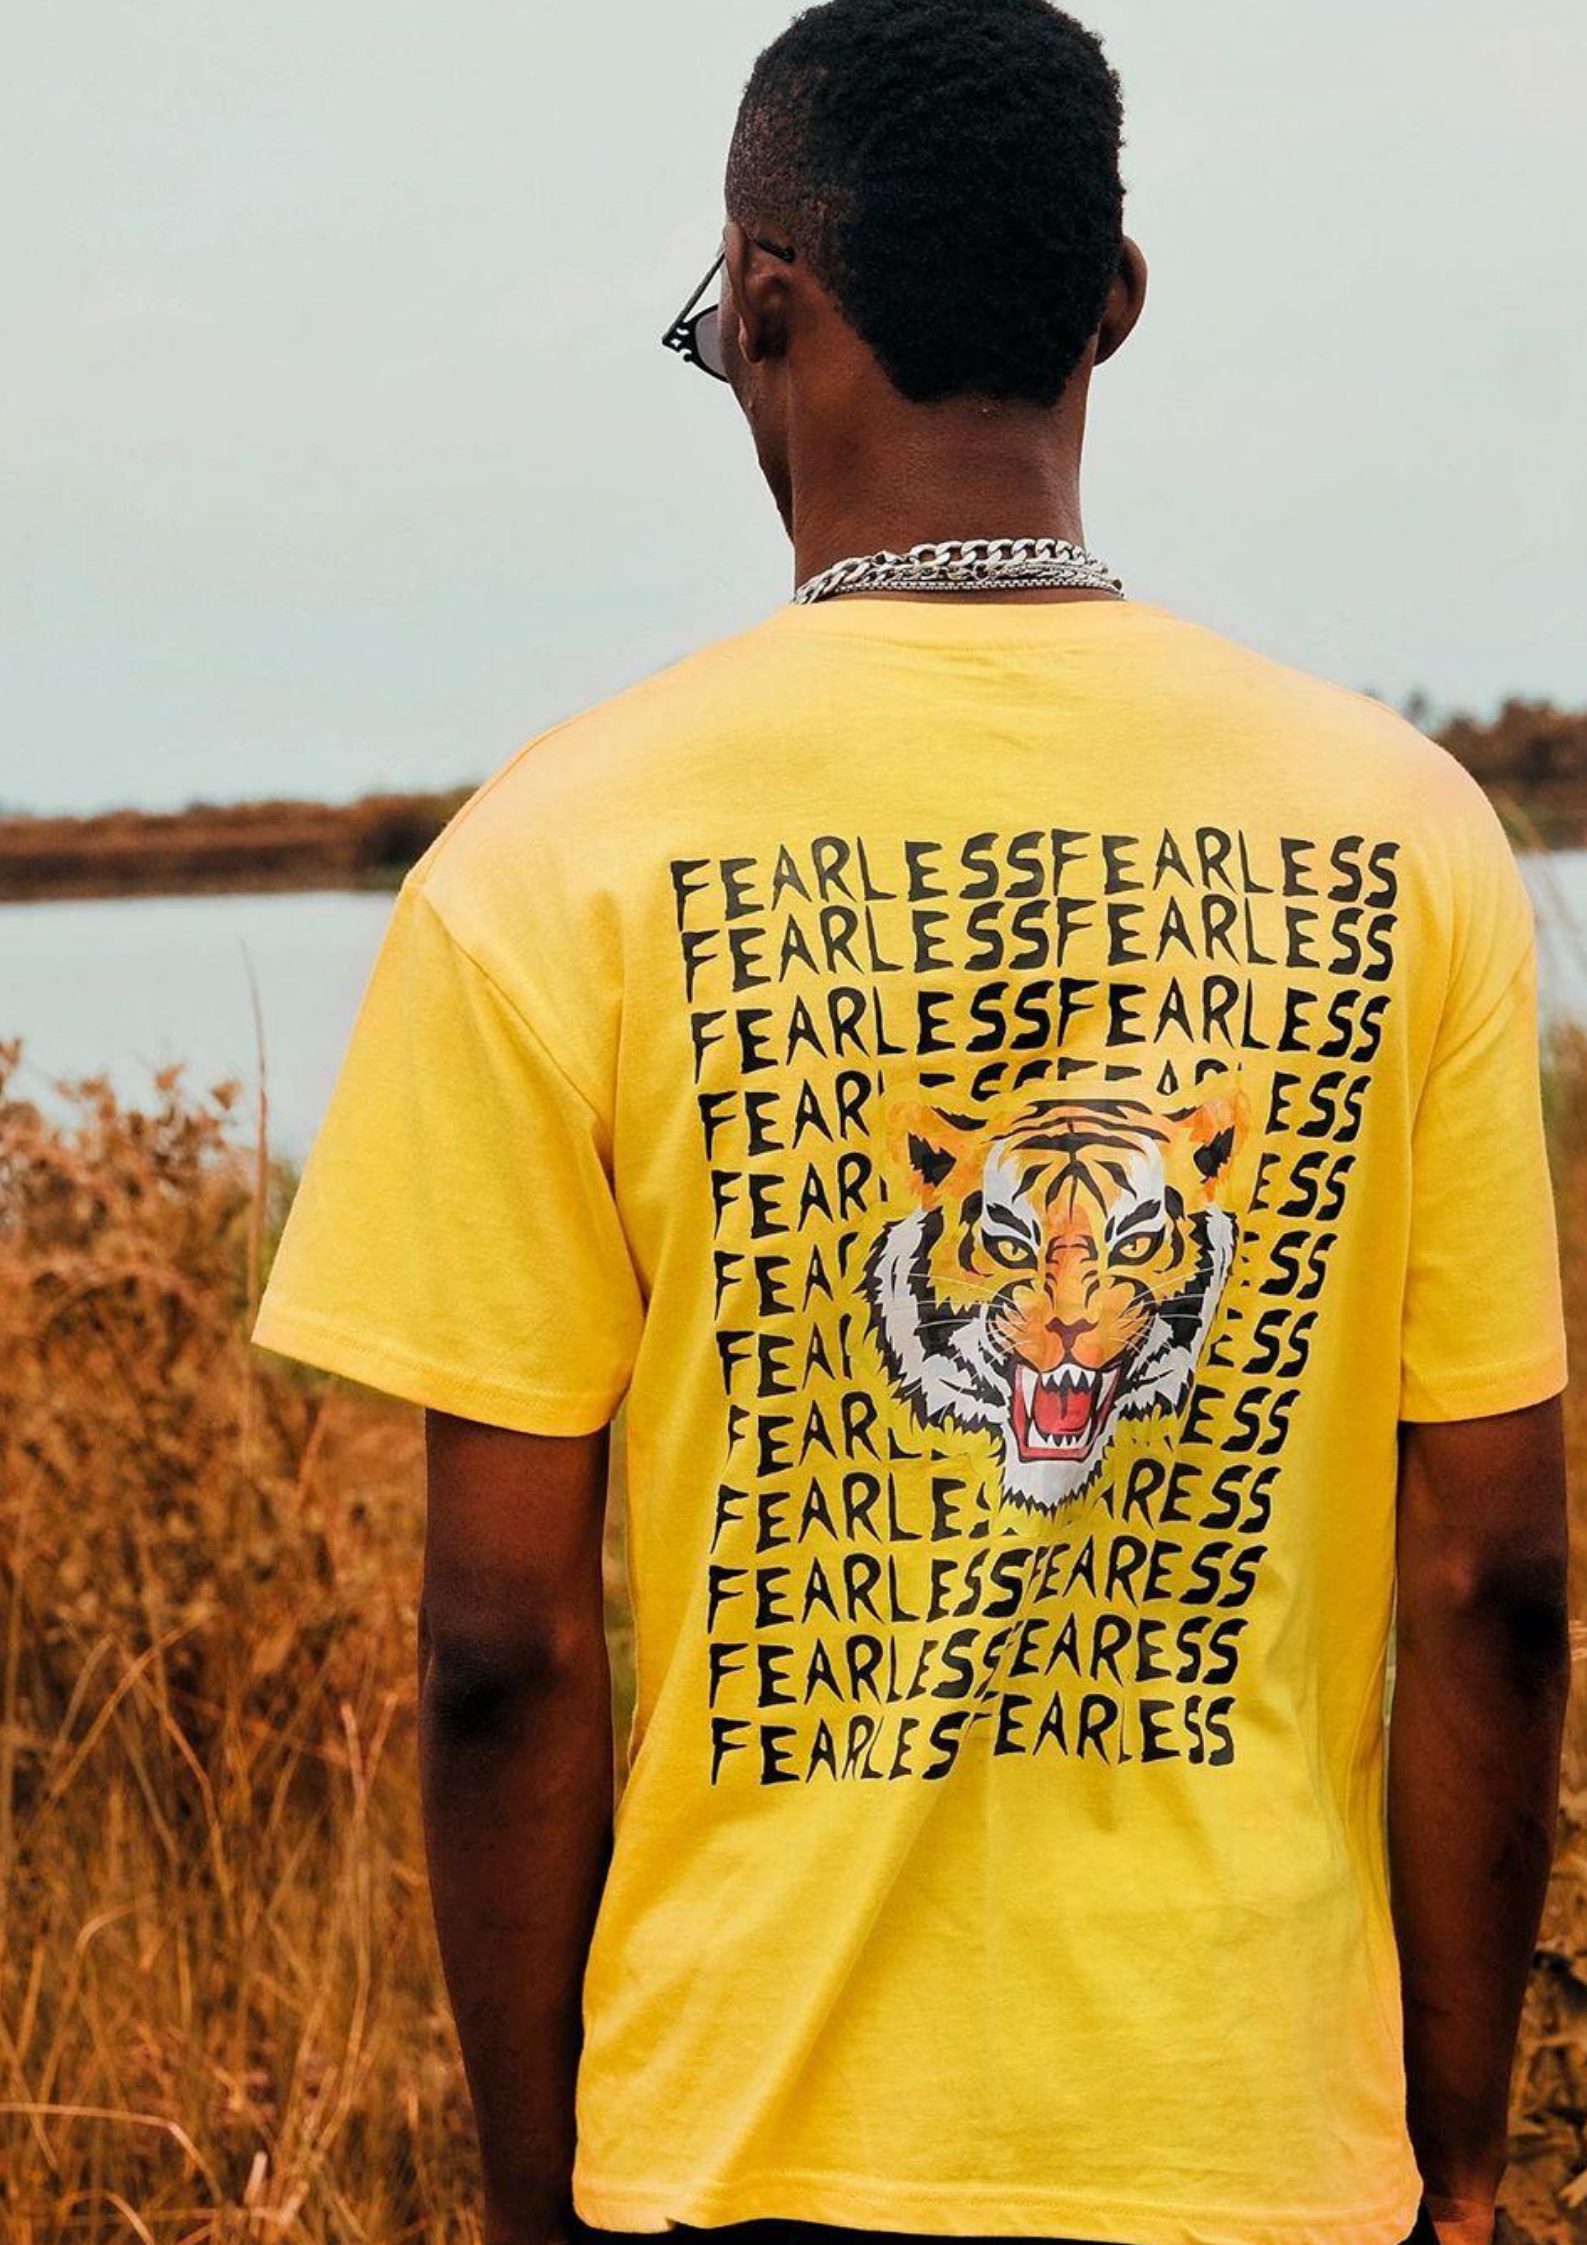 MEET THE URBAN LABEL MAKING STREETWEAR FASHION MORE ACCESSIBLE TO YOUNG AFRICANS